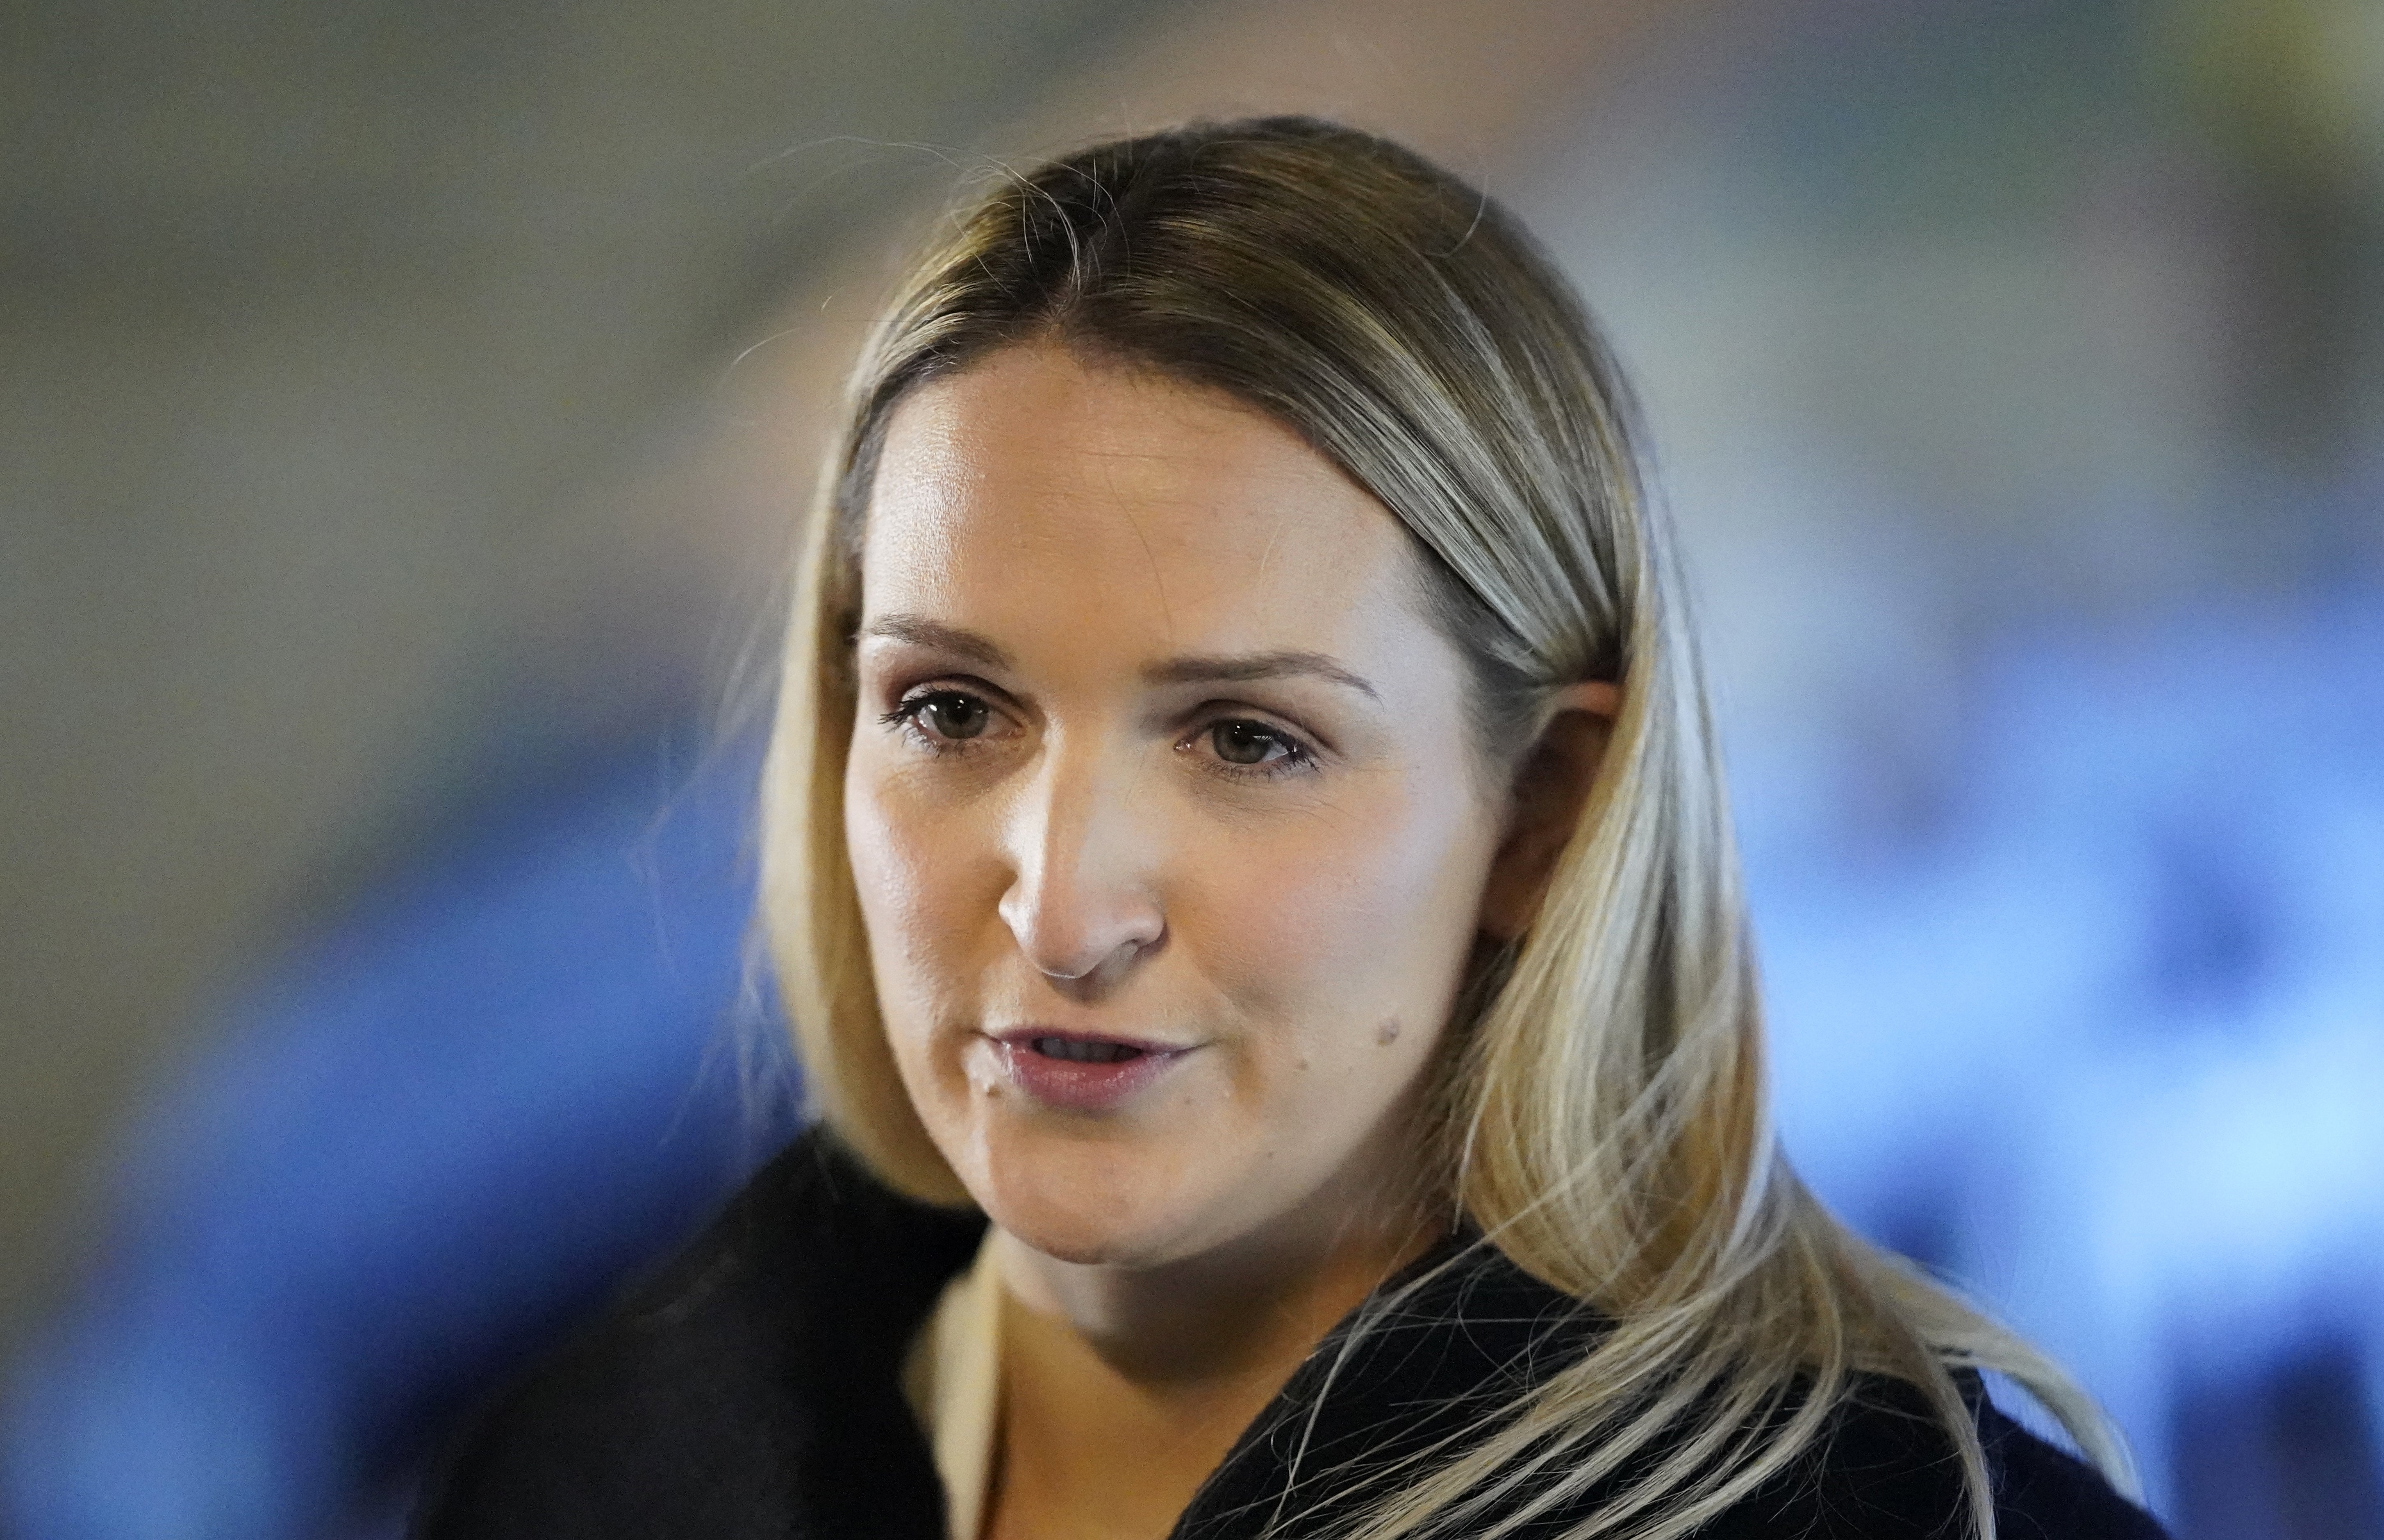 Justice Minister Helen McEntee has vowed to deliver more than 400 refuge beds across the country, as part of a plan on domestic violence services.